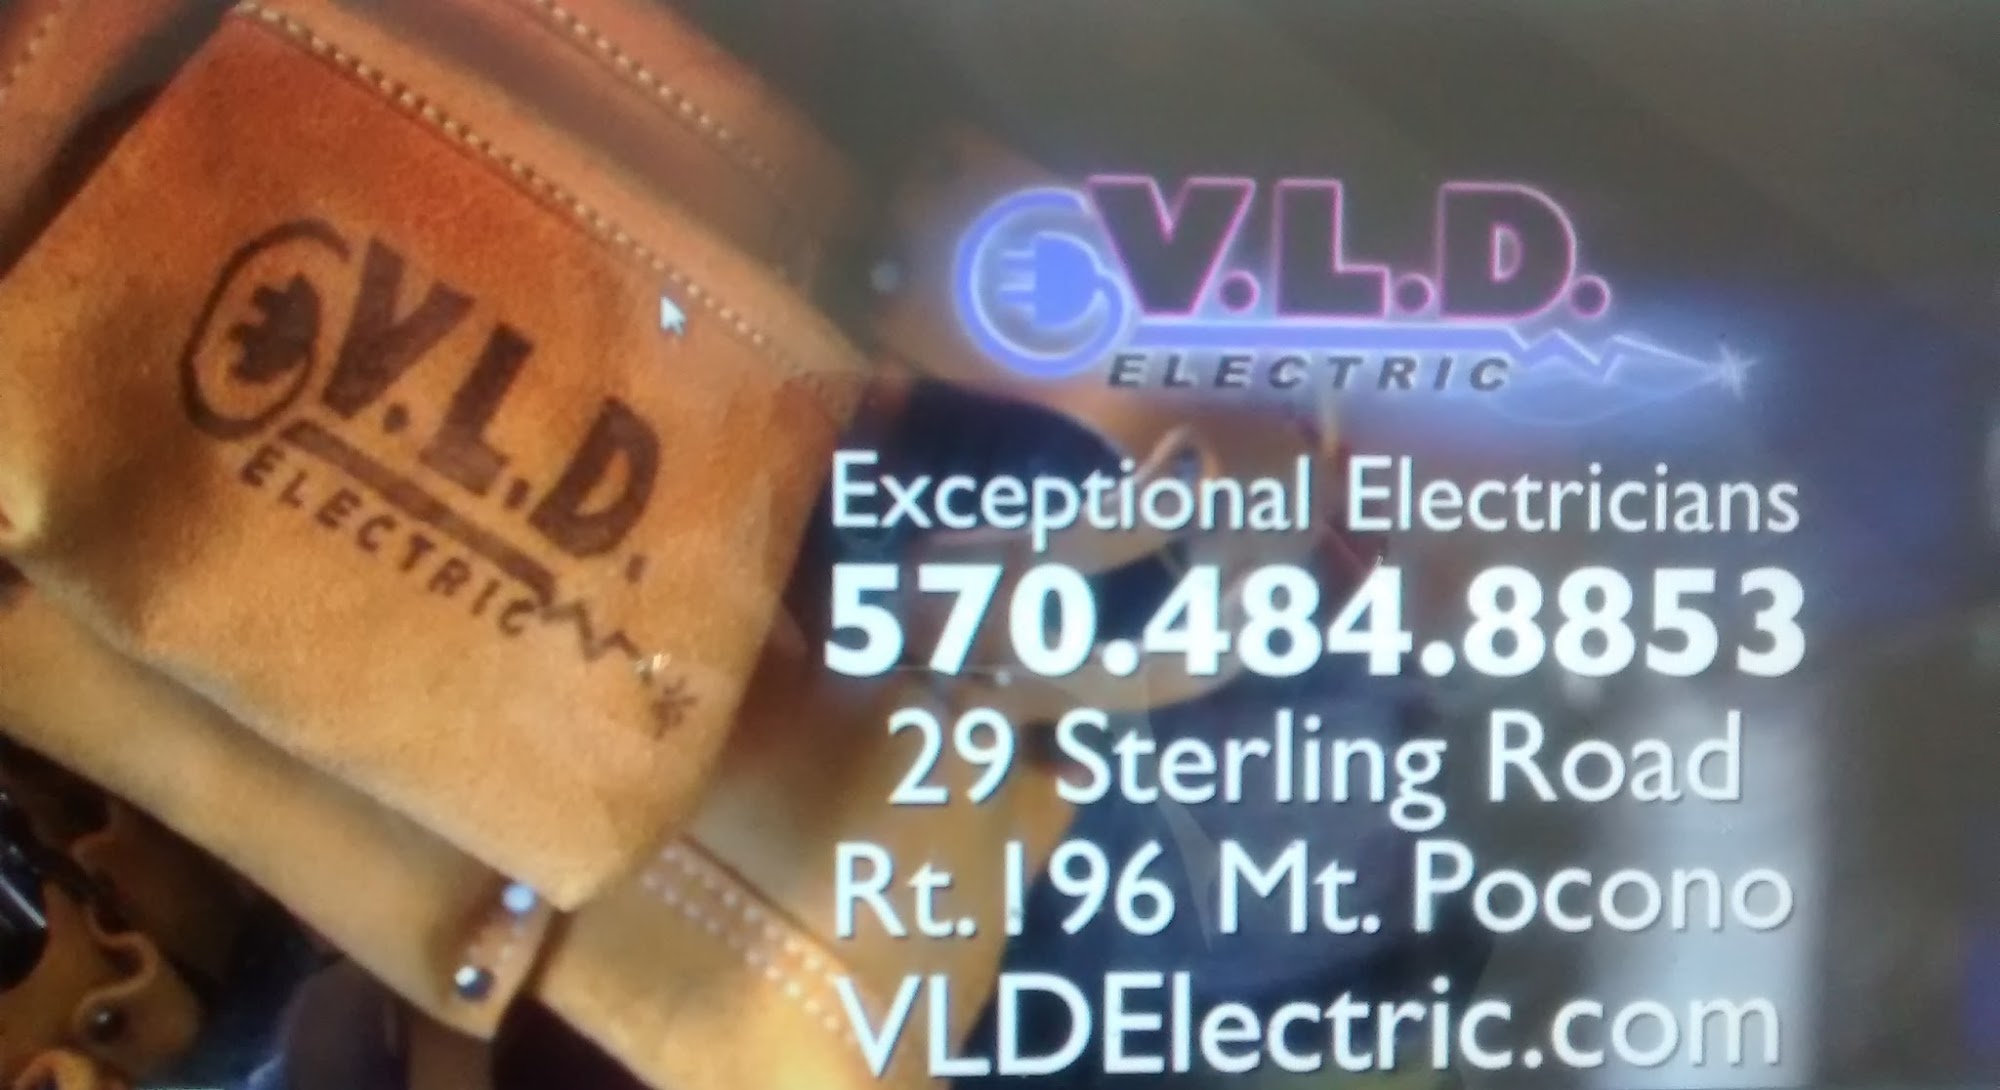 VLD Electric